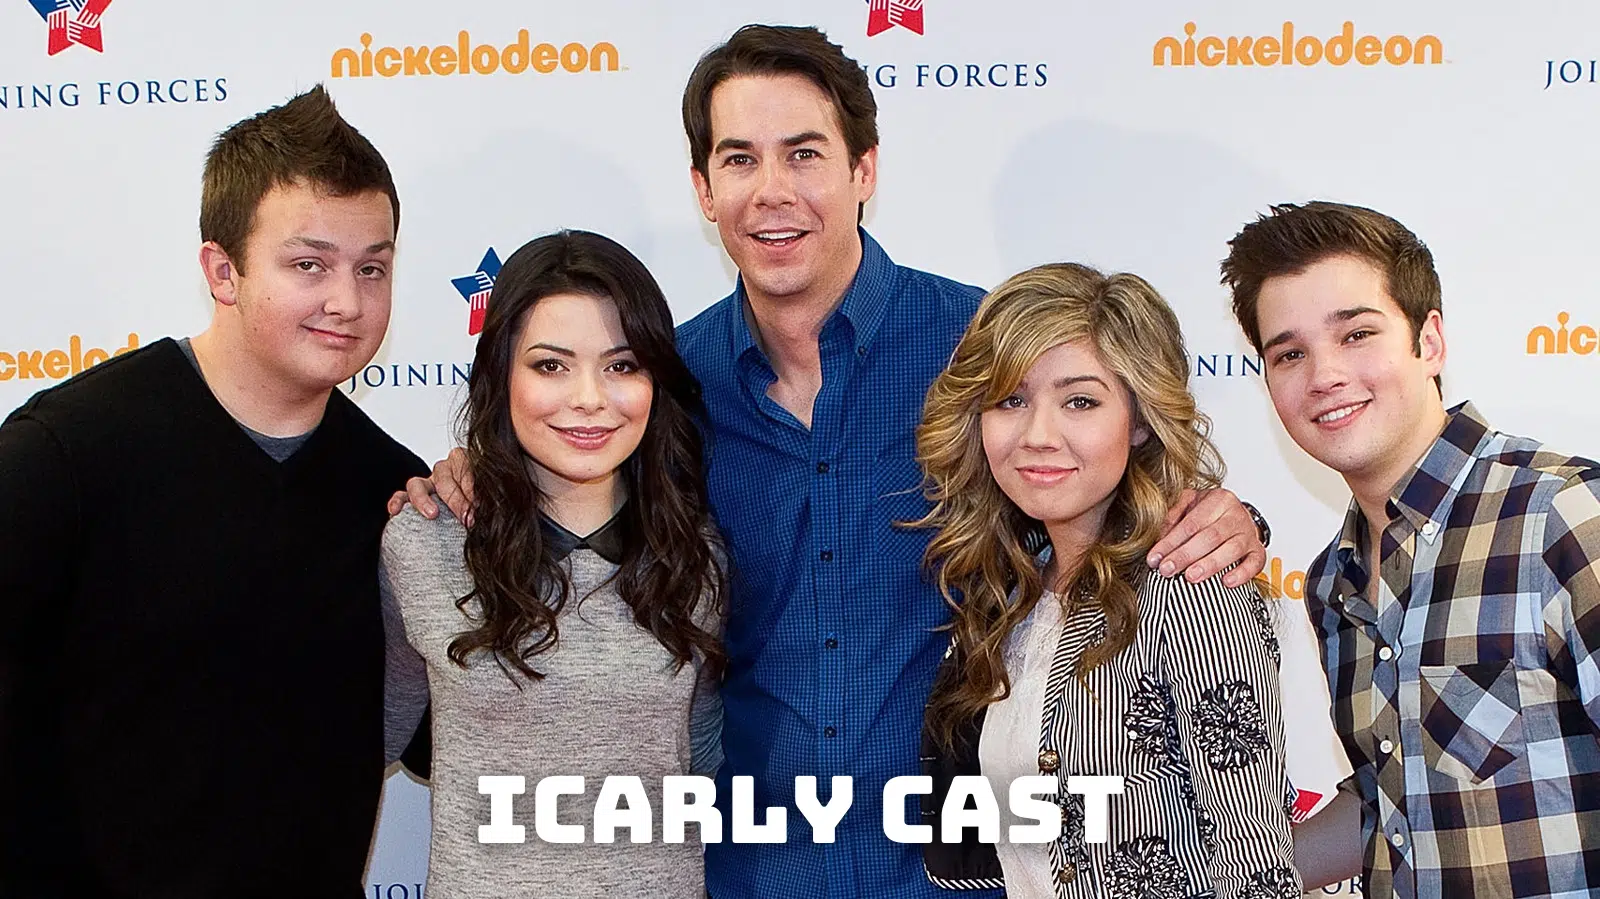 iCarly Cast - Where Are They Now?